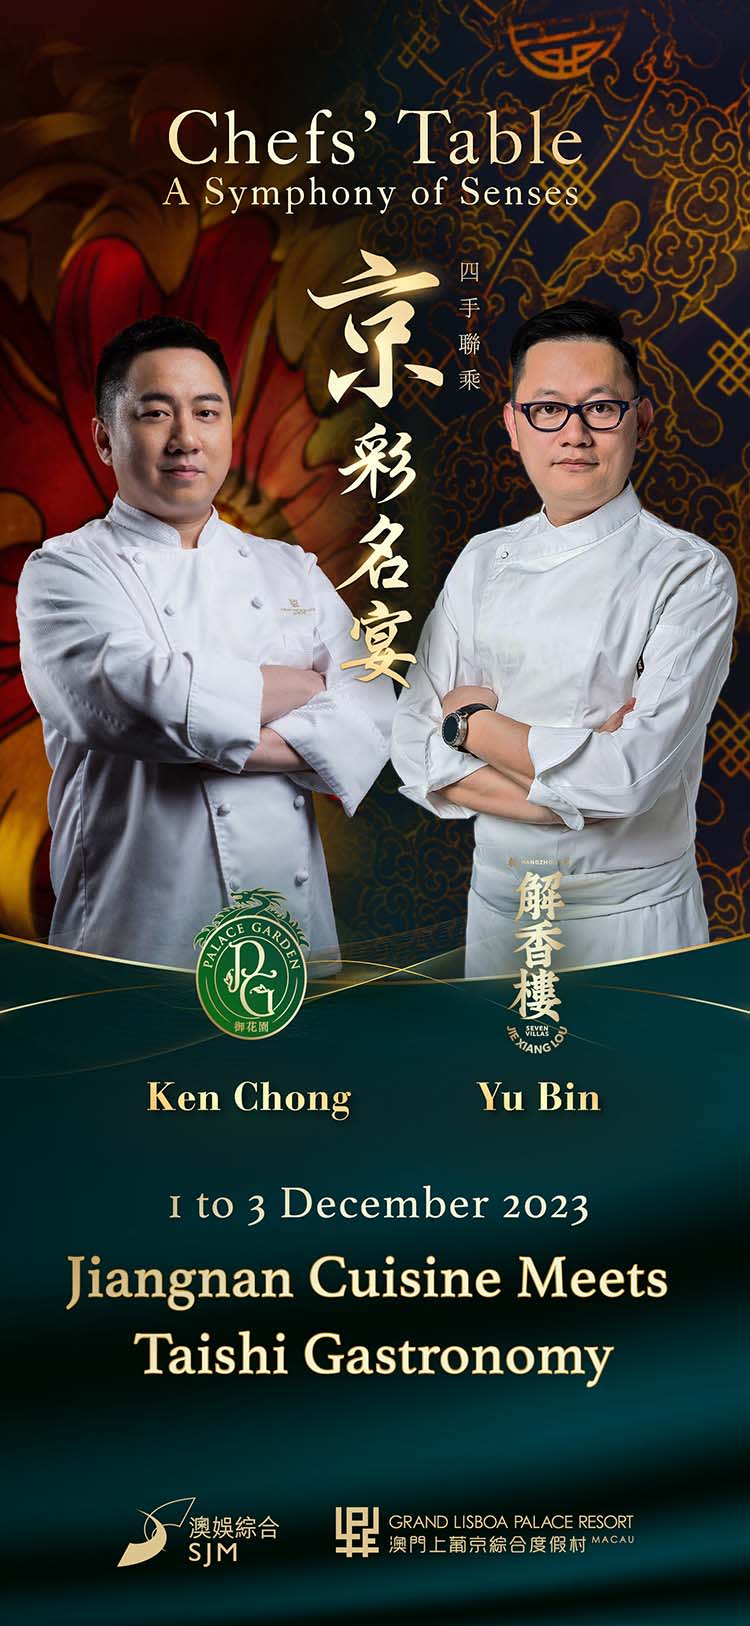 Collaborative dinner event held by two world-renowned chefs at Palace Garden, Grand Lisboa Palace, Macau